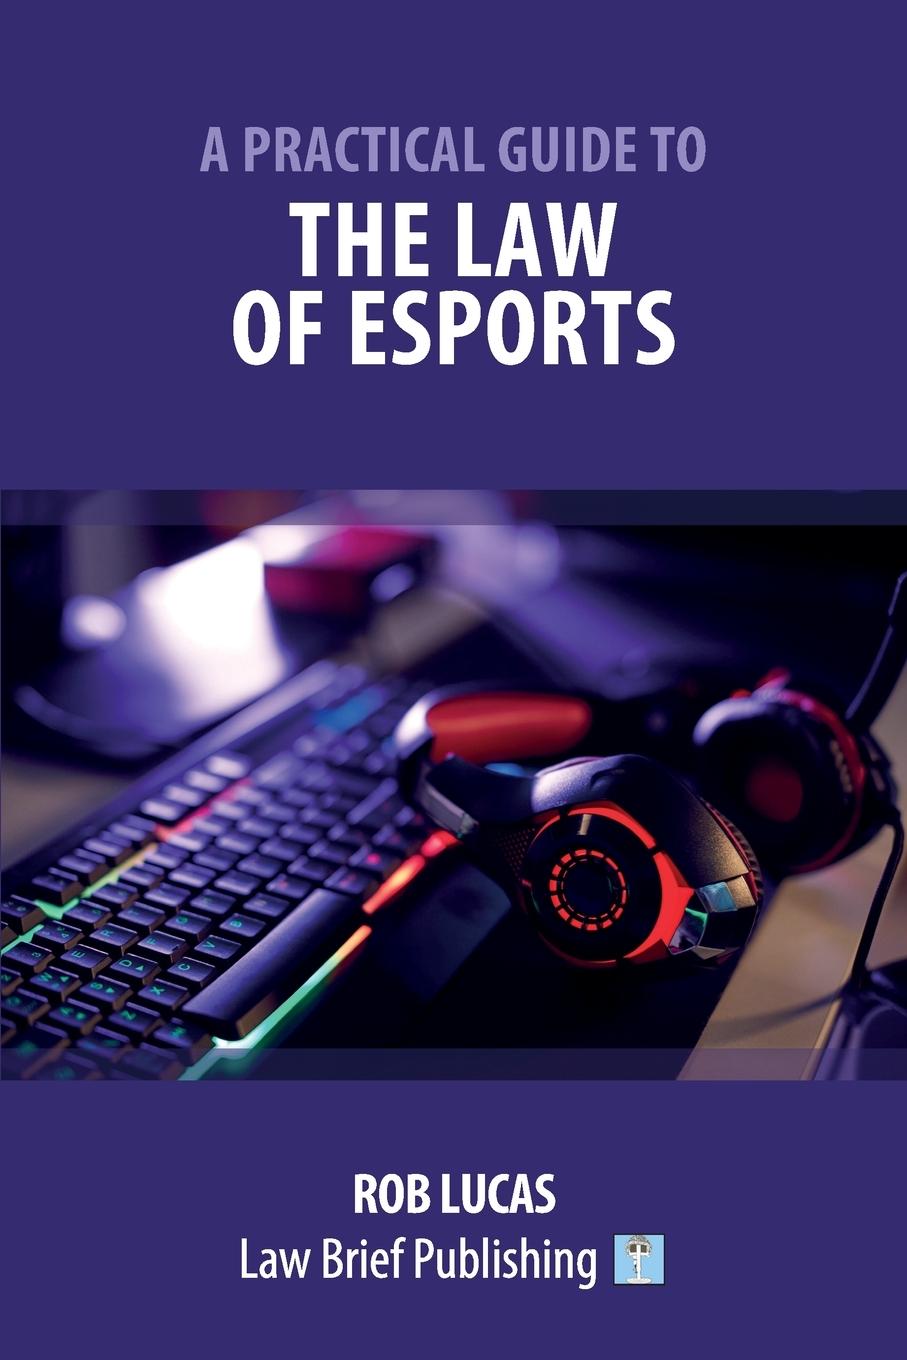 Könyv Practical Guide to the Law of Esports Lucas Rob Lucas